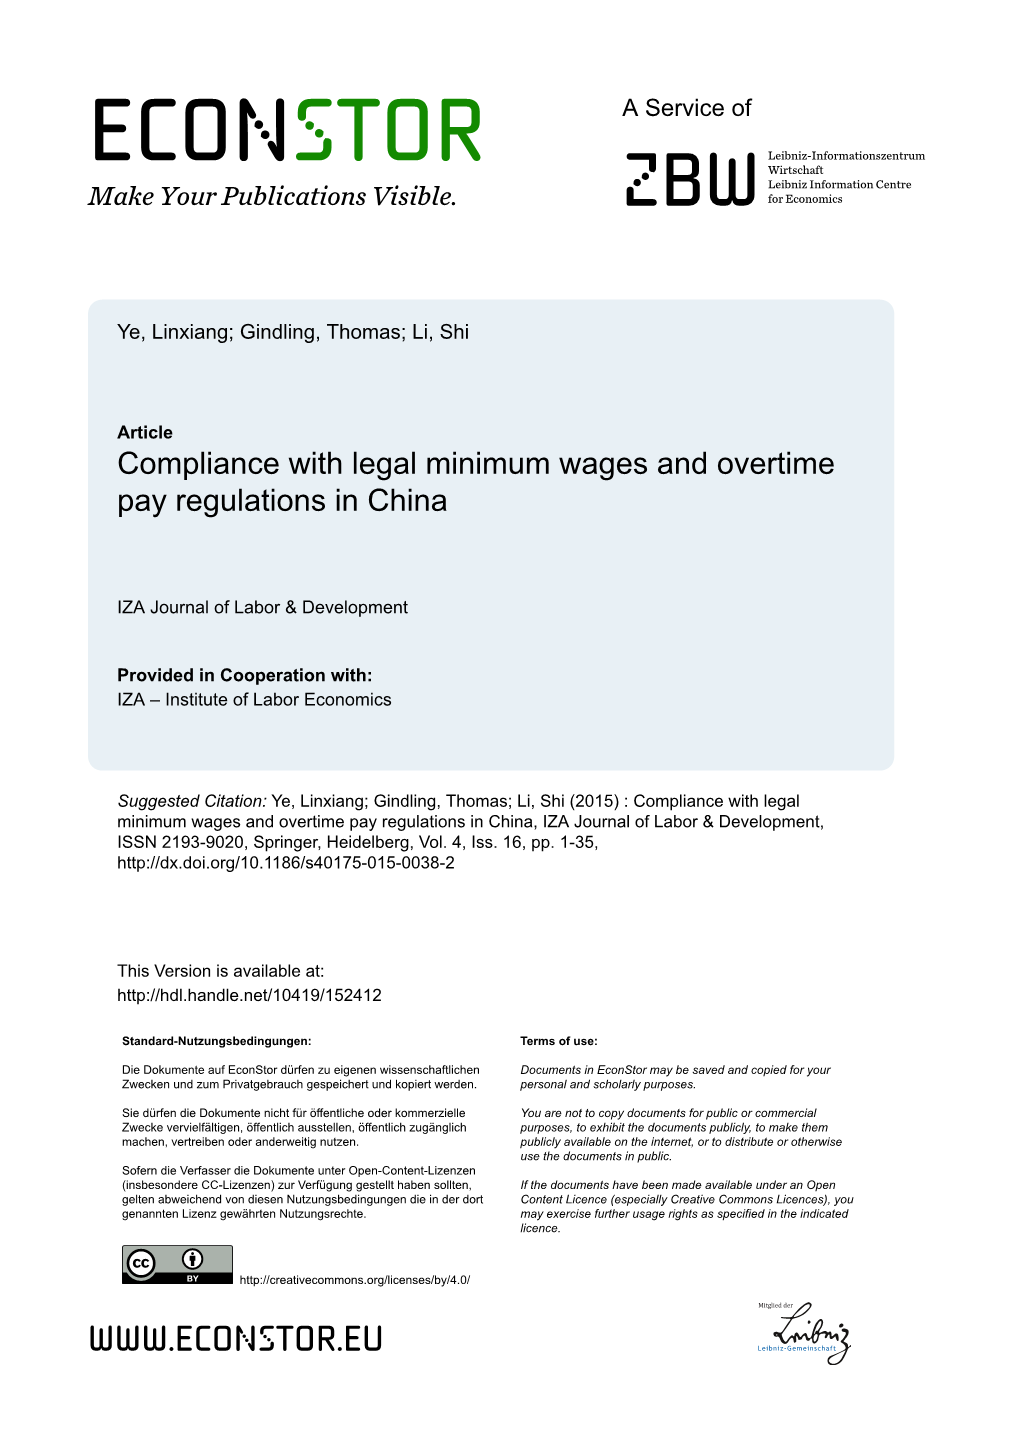 Compliance with Legal Minimum Wages and Overtime Pay Regulations in China